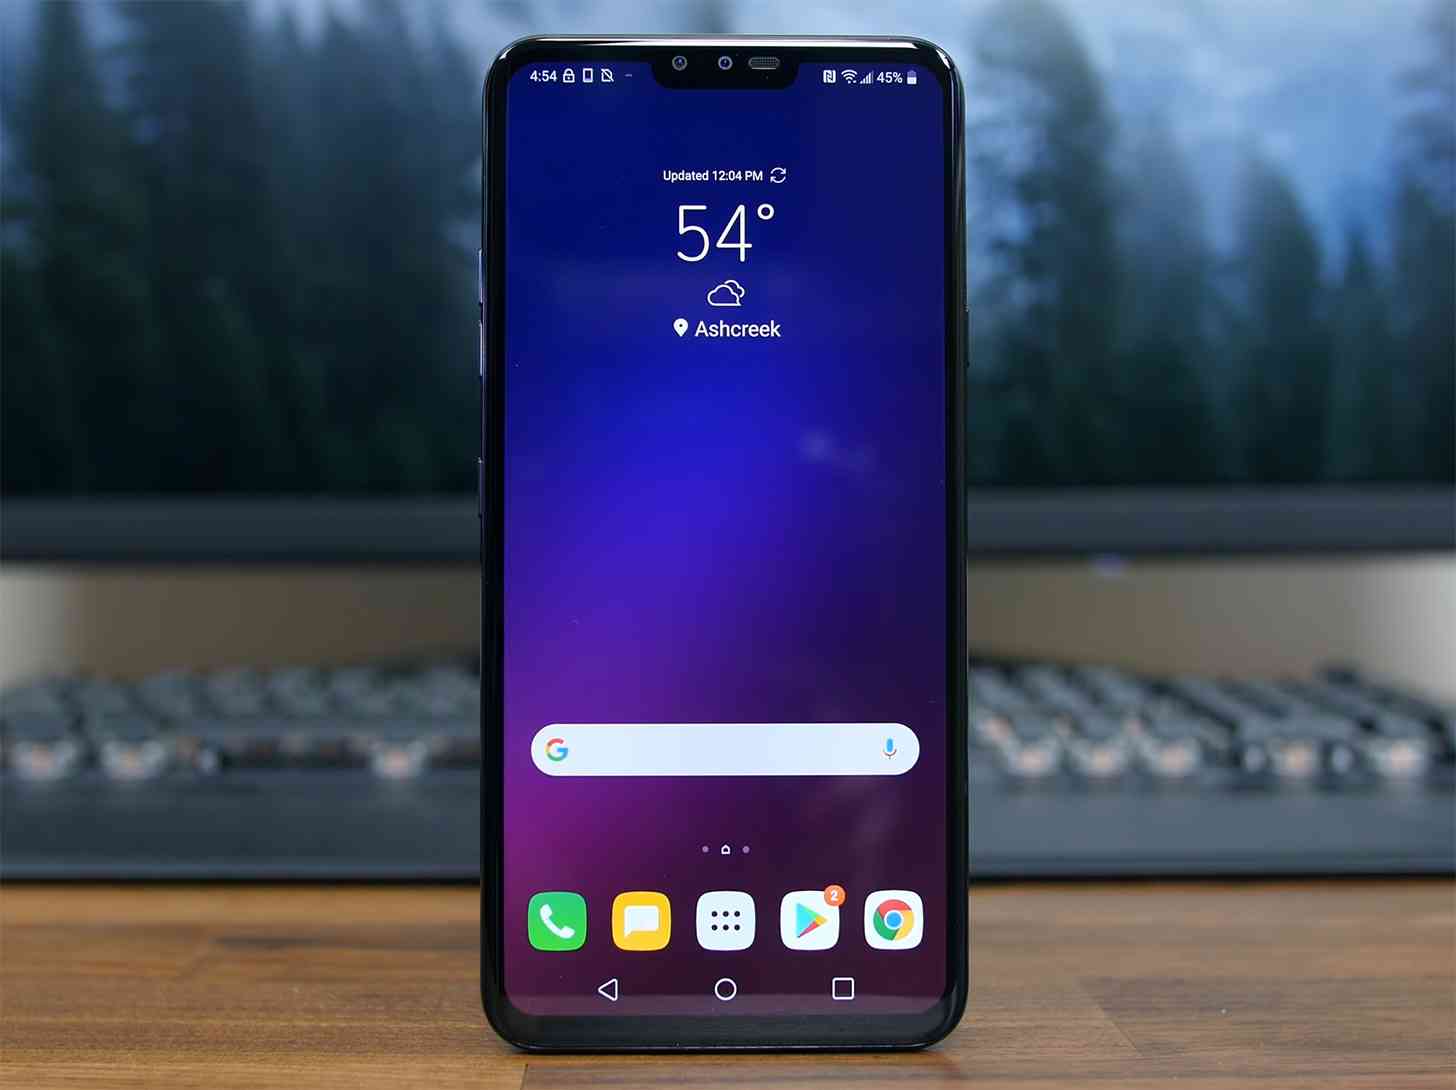 LG V40 ThinQ hands-on